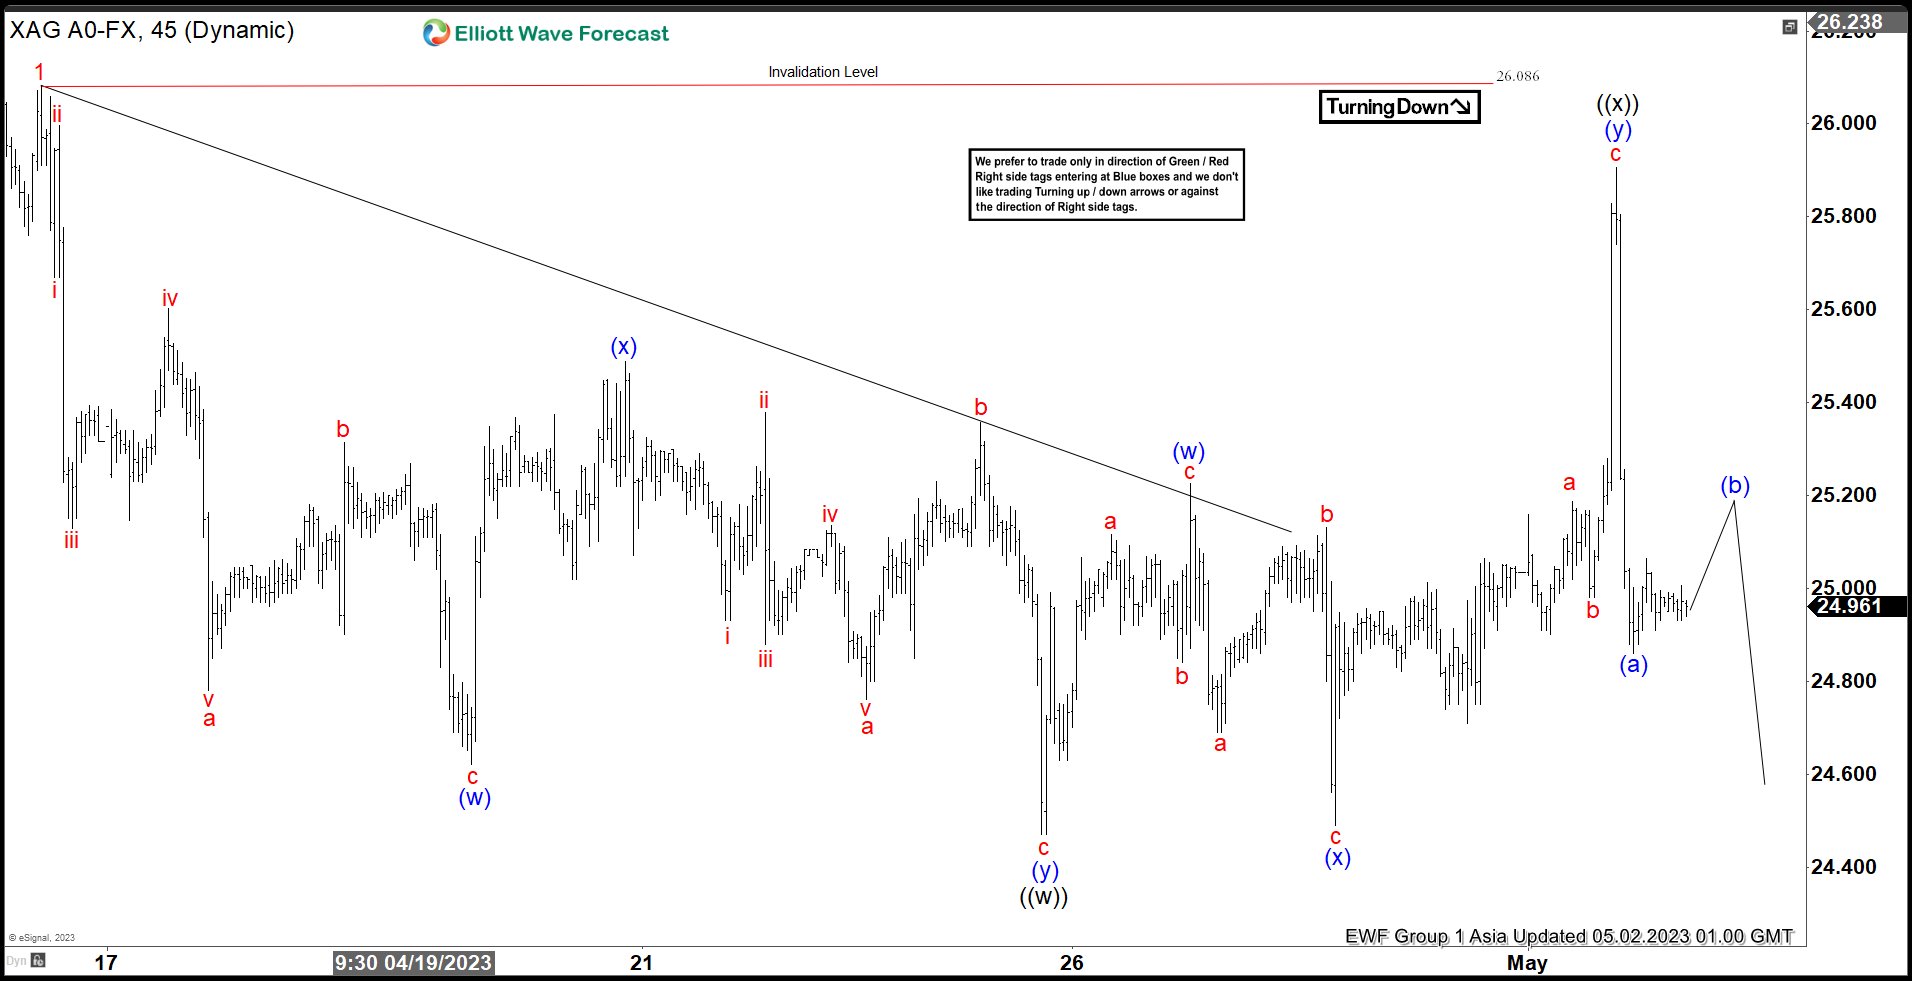 Elliott Wave View Suggests Silver (XAGUSD) Correction Still Ongoing